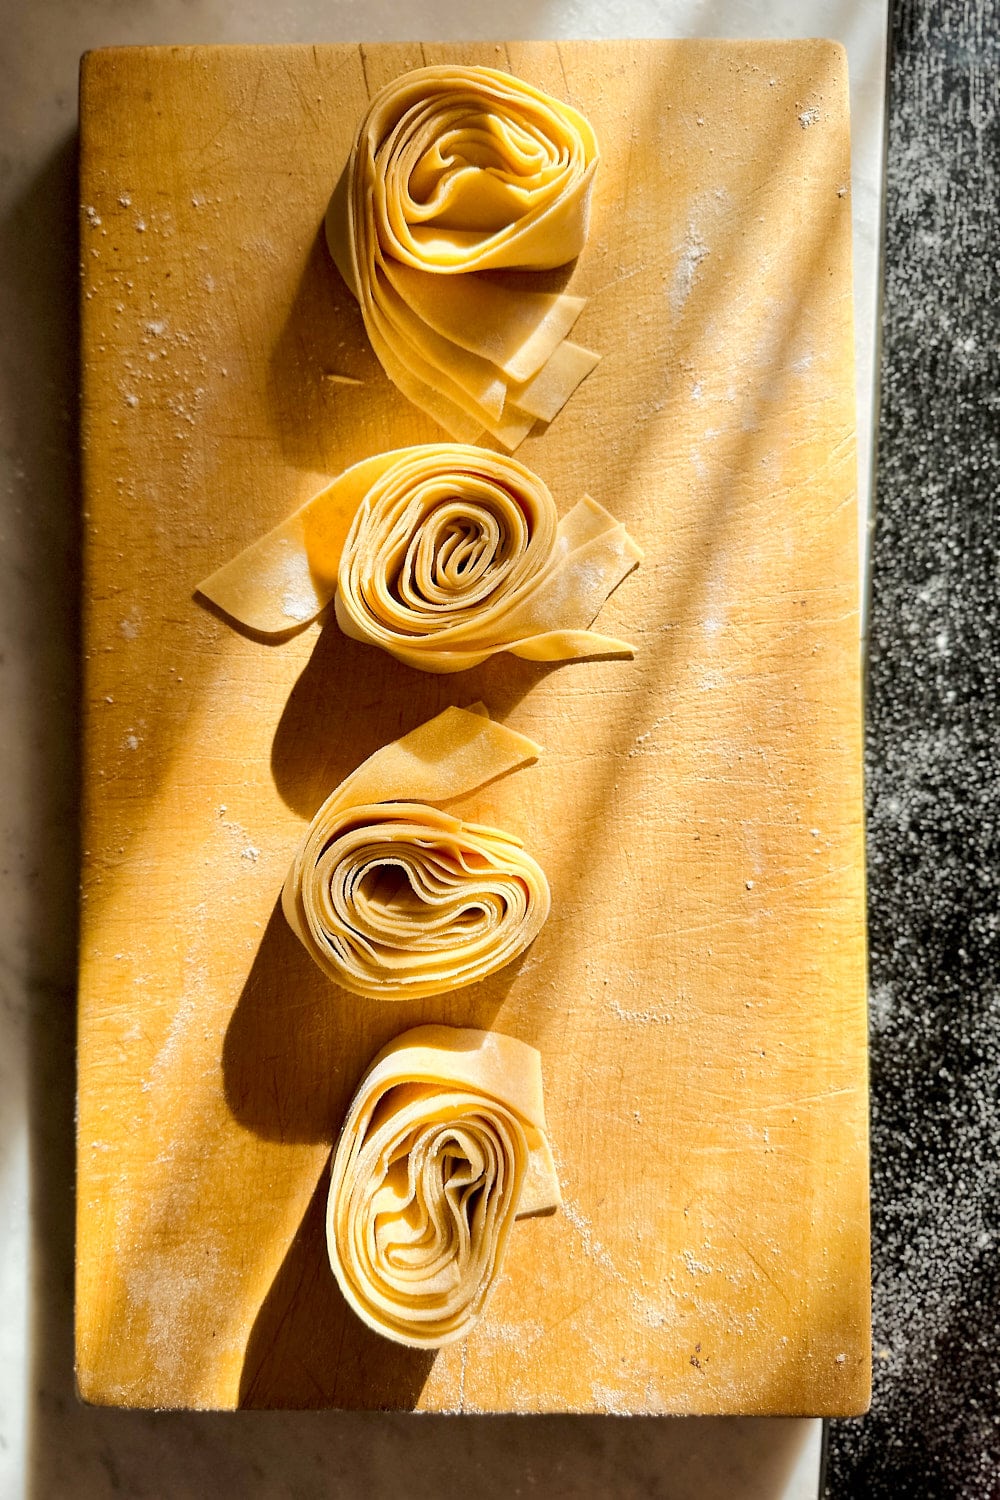 Four pasta nests of hand-cut pappardelle pasta on a wooden board.